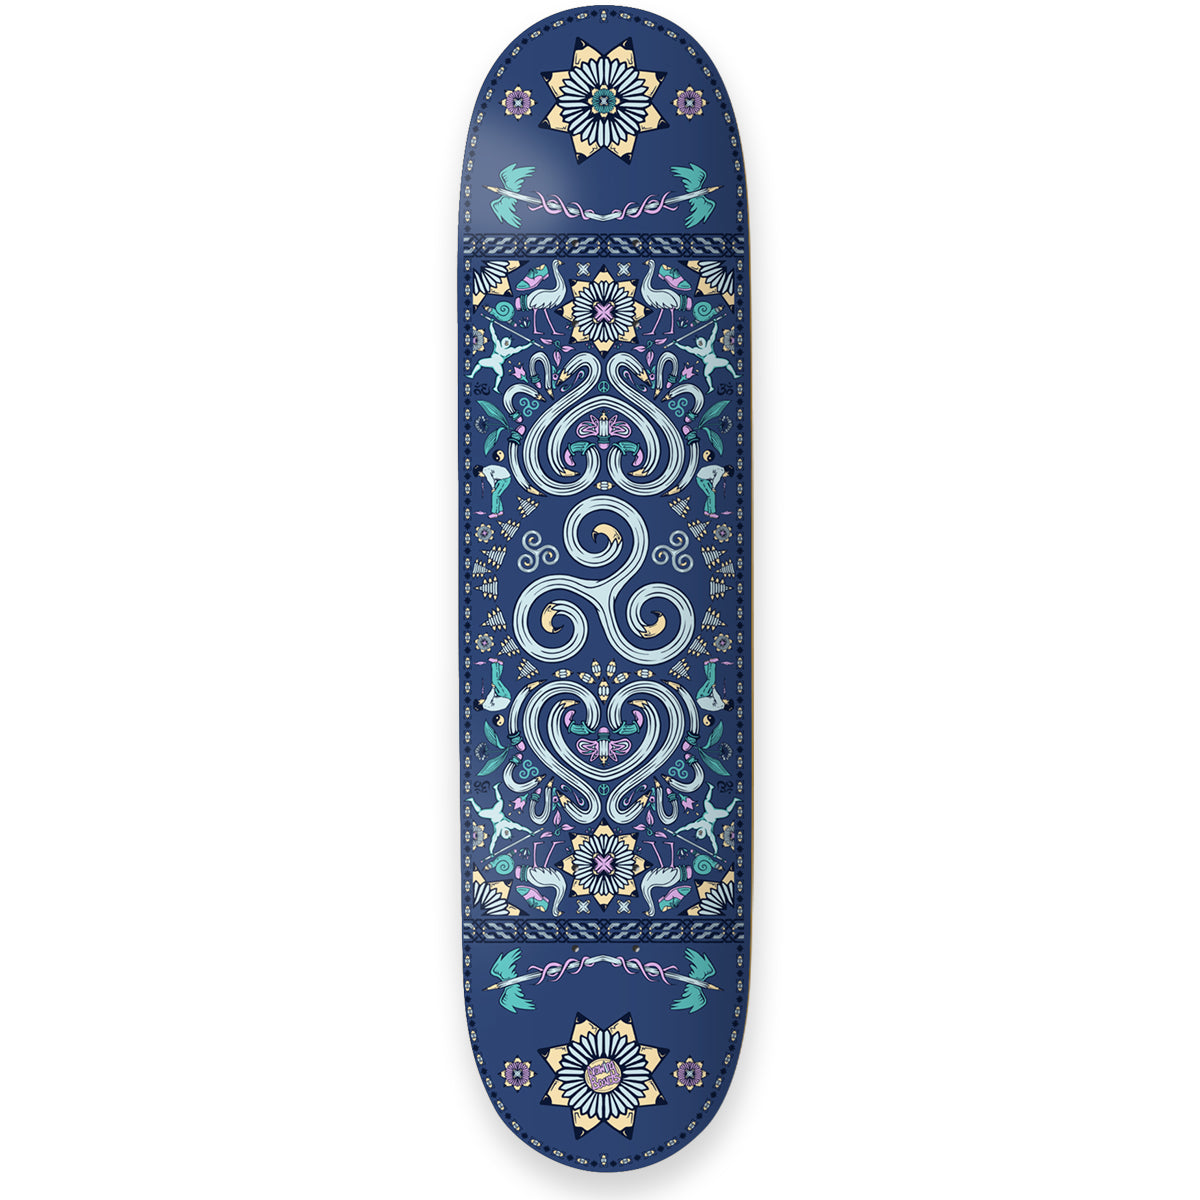 The Drawing Boards - 8.0" - Positive Symbols - Spiral of Life Deck - Prime Delux Store